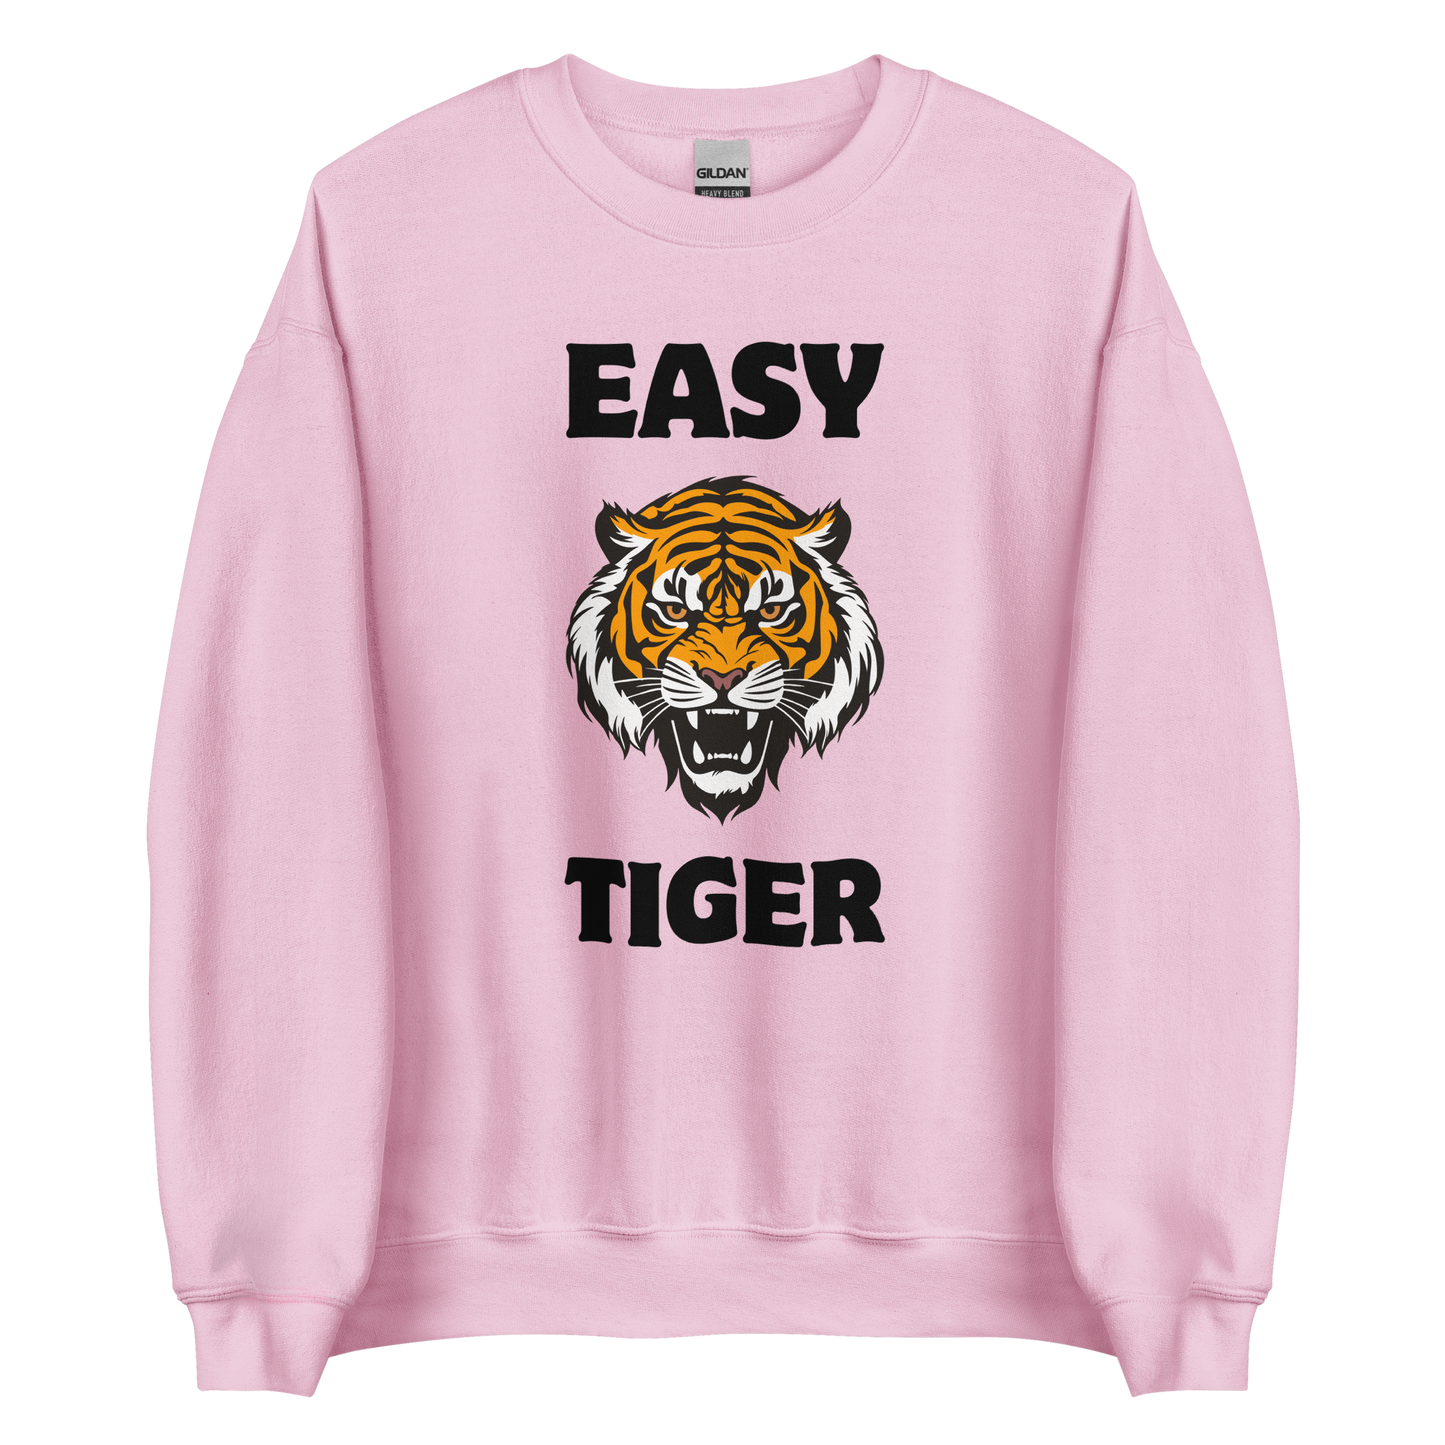 Light Pink Tiger Sweatshirt featuring a Easy Tiger graphic on the chest - Funny Graphic Tiger Sweatshirts - Boozy Fox